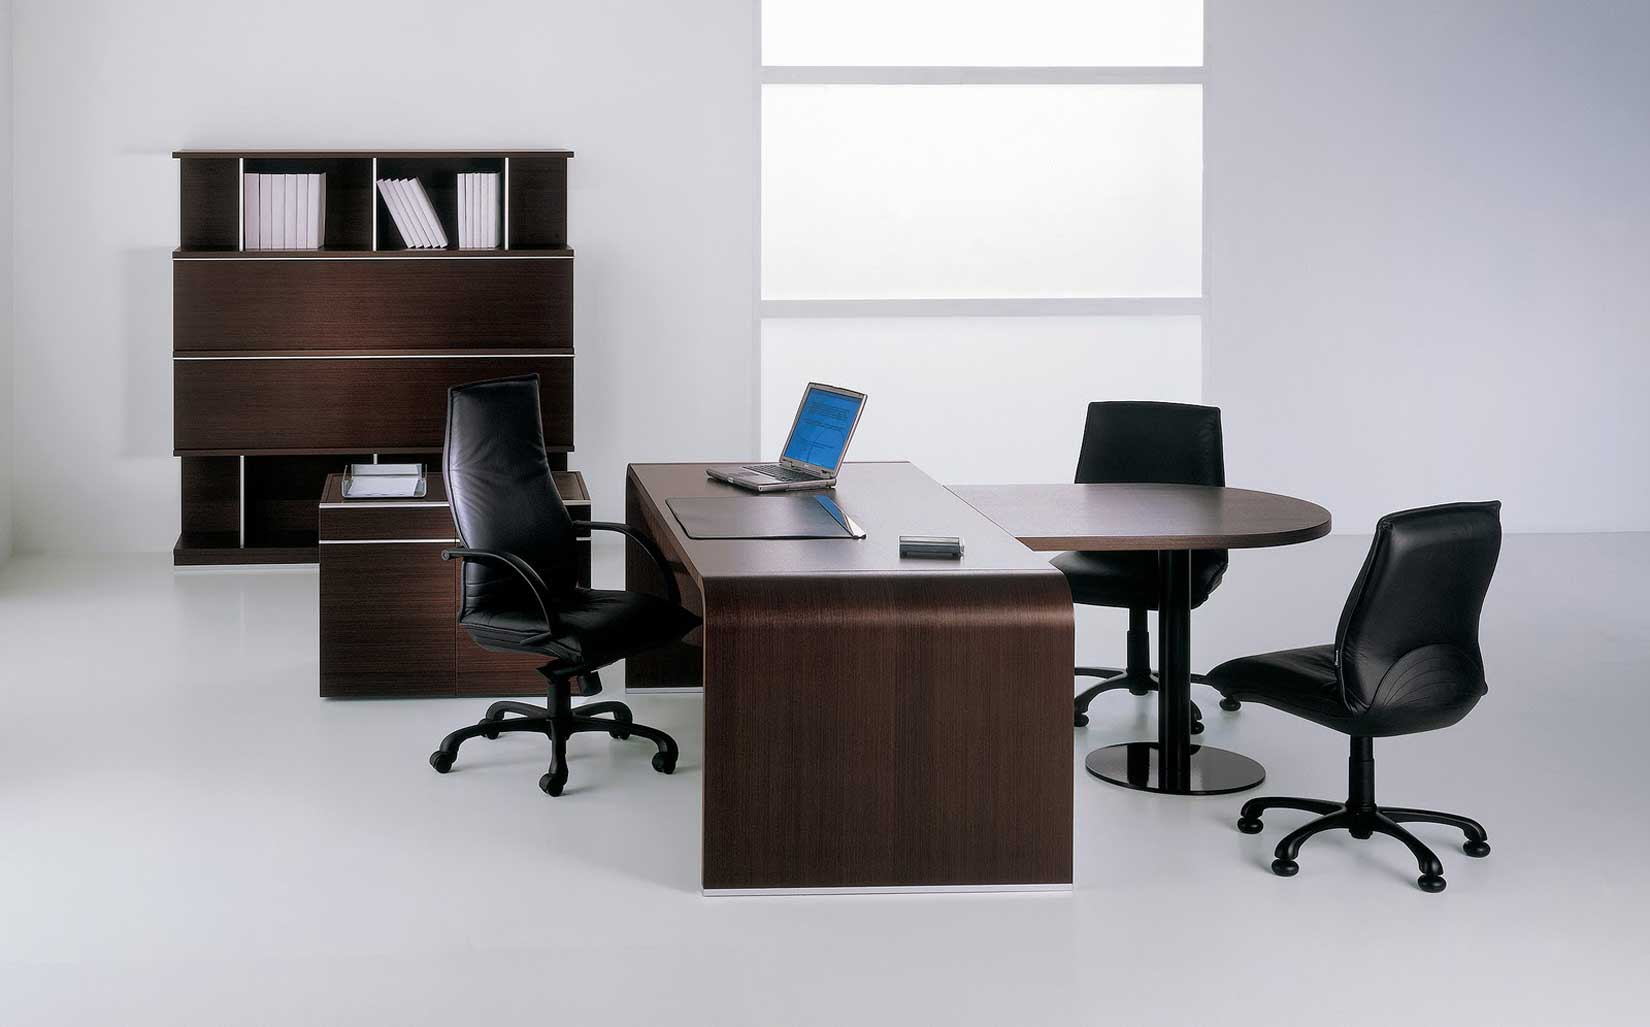 Office Office Room Exquisite On And With Modern Desk Designoursign 24 Office Room